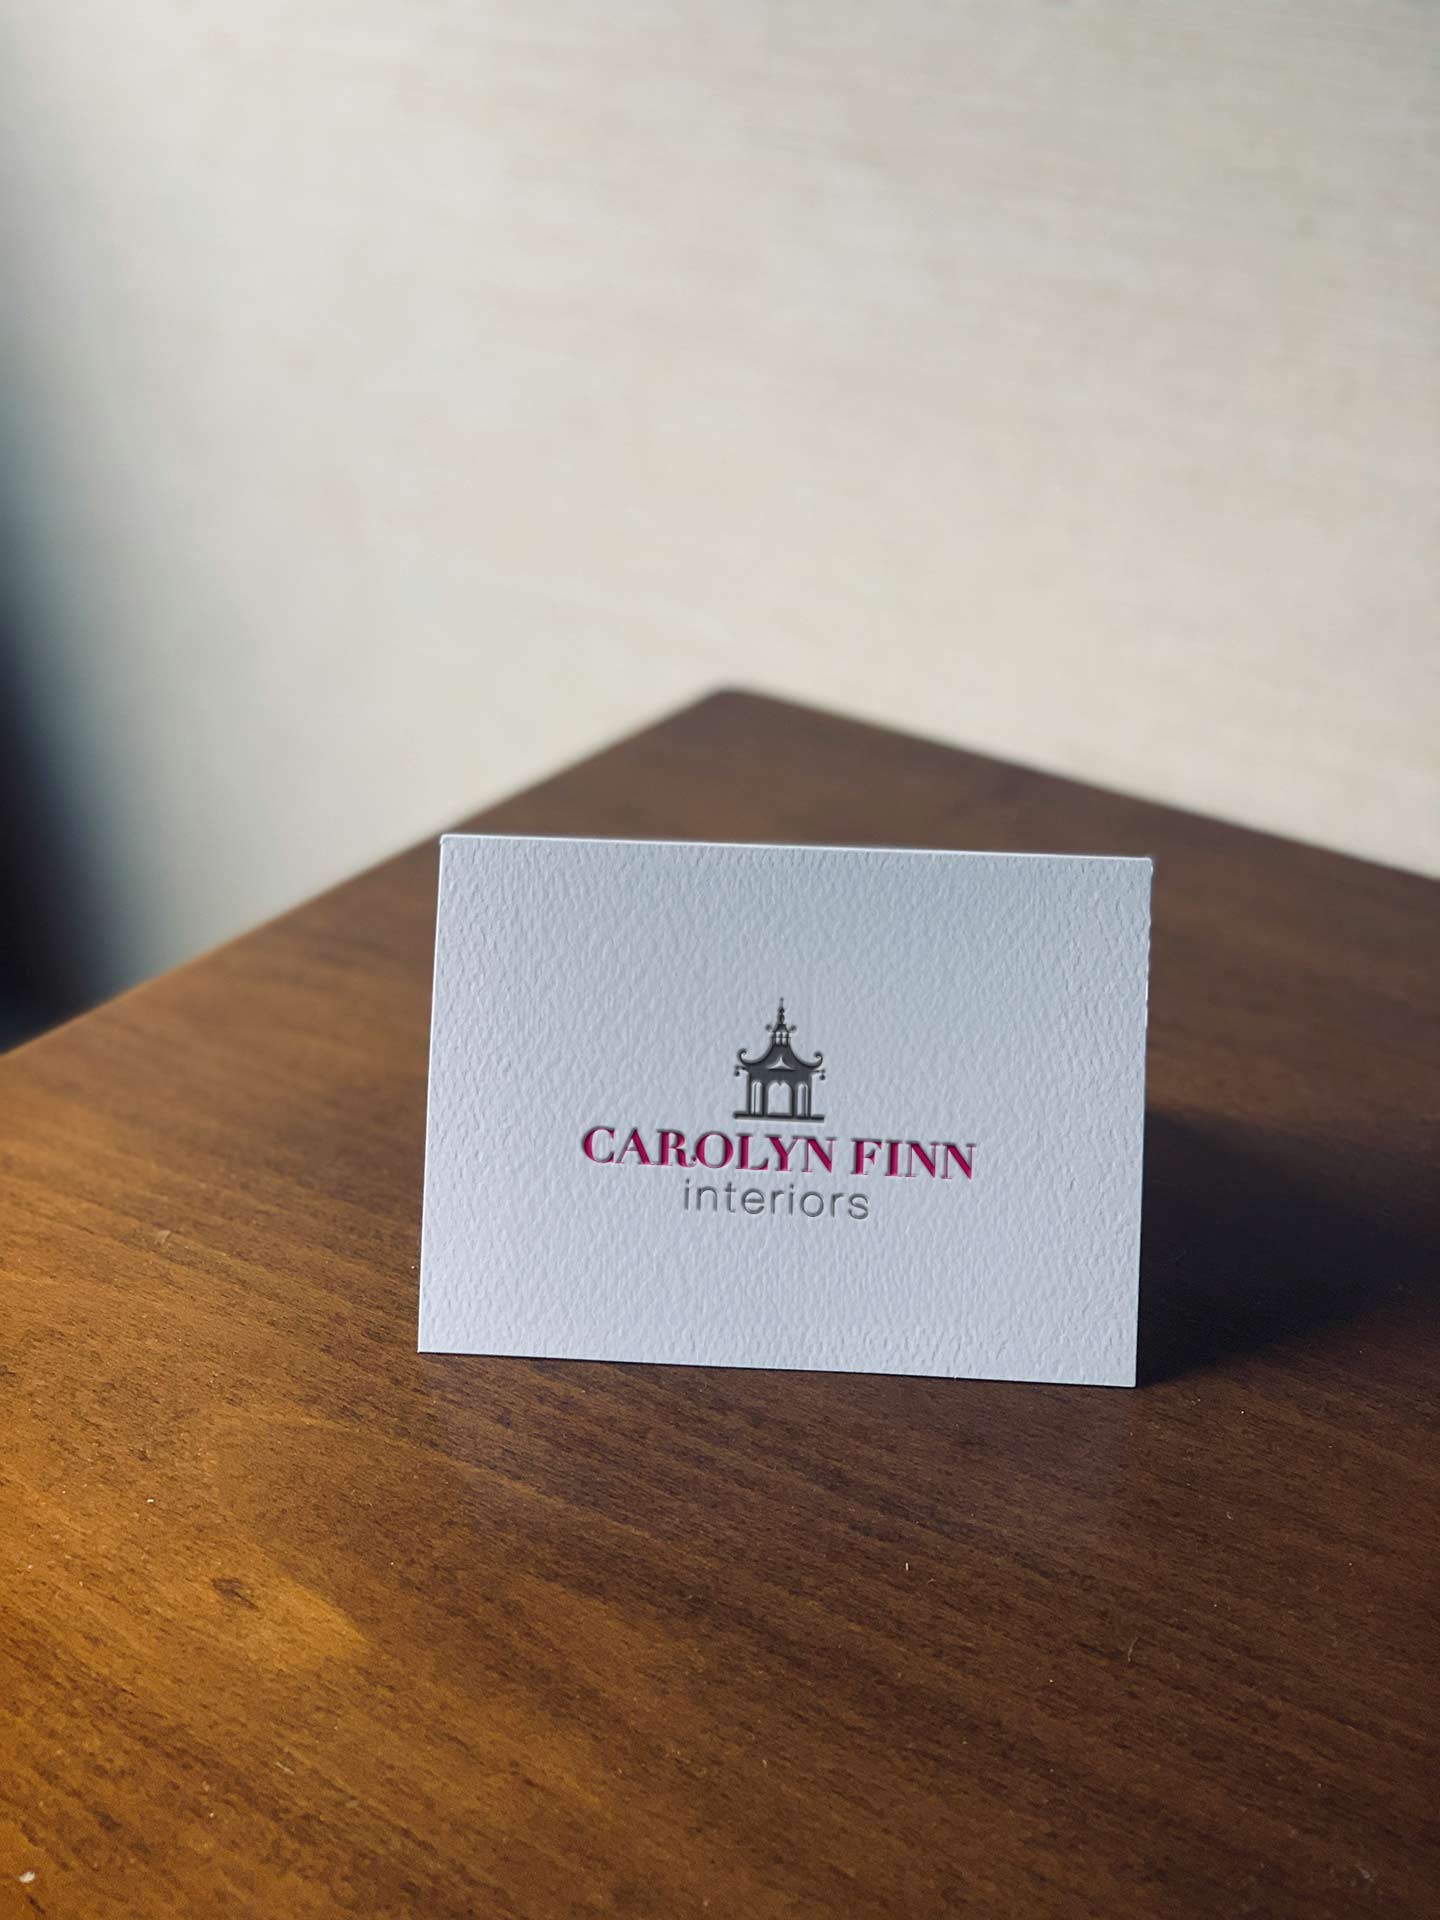 The front side of a business card featuring the client's logo.